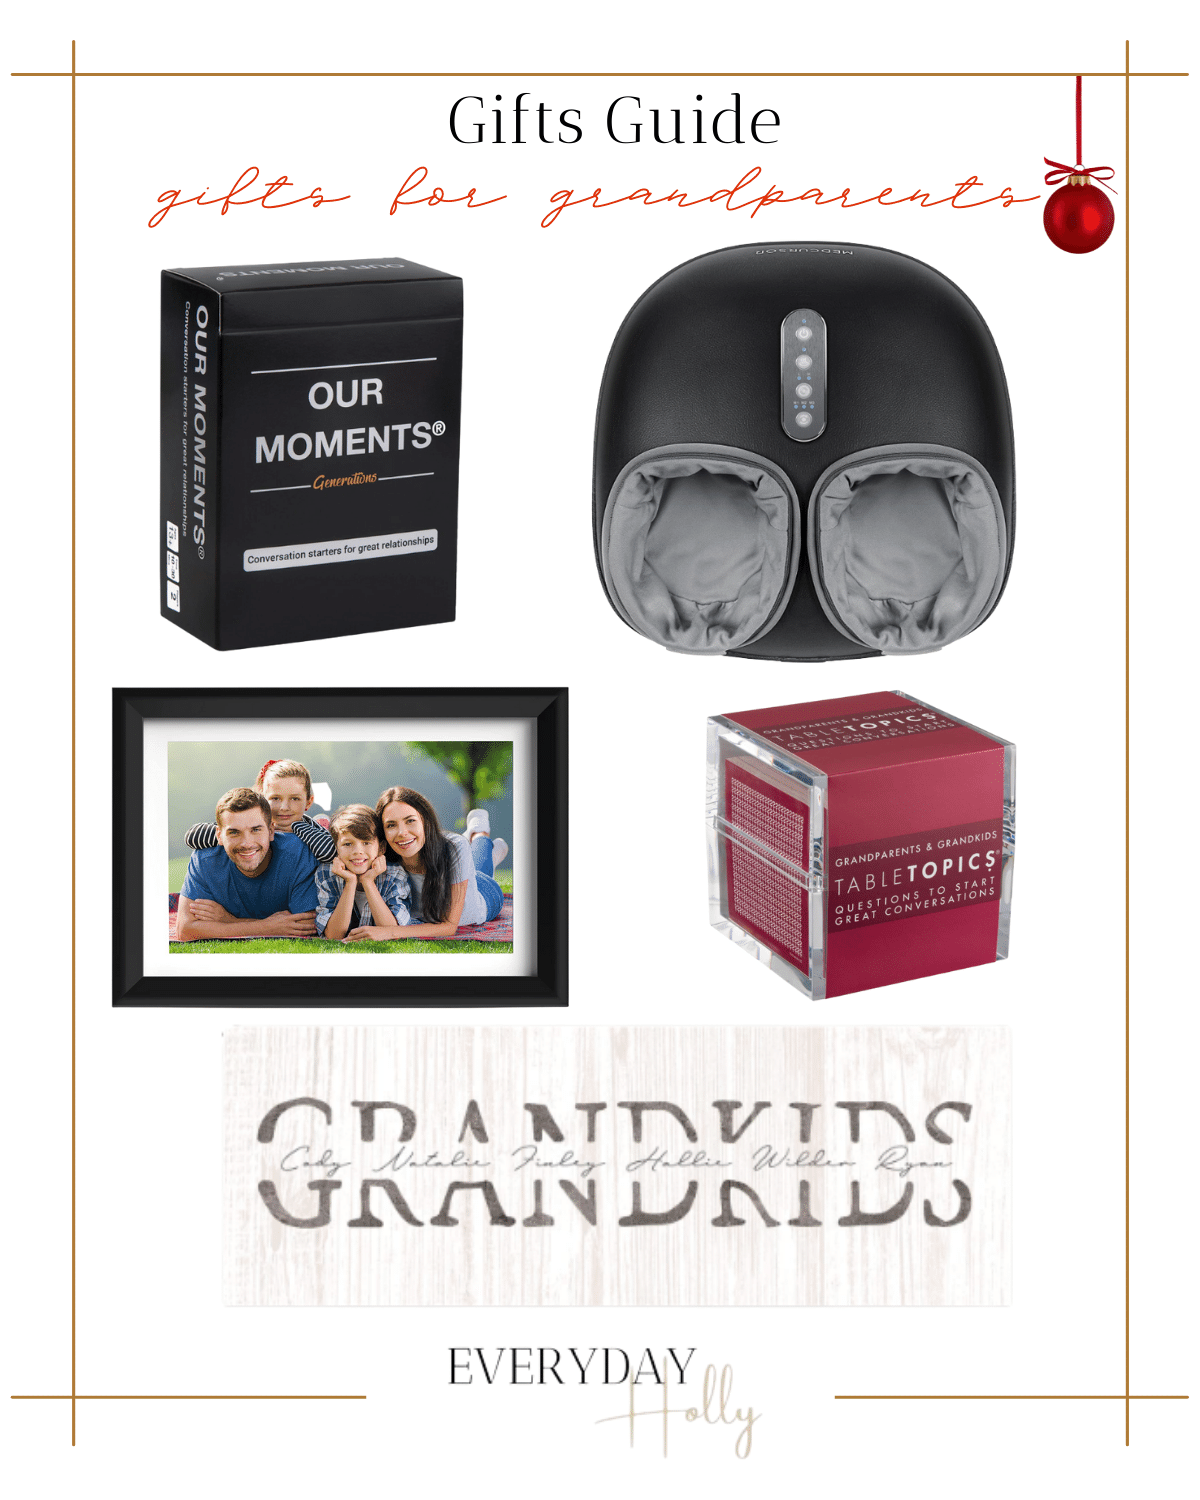 gift guide for grandparents, gifting ideas, conversation starting card game, foot massager, picture frame, customizable wall art with grandkids names 